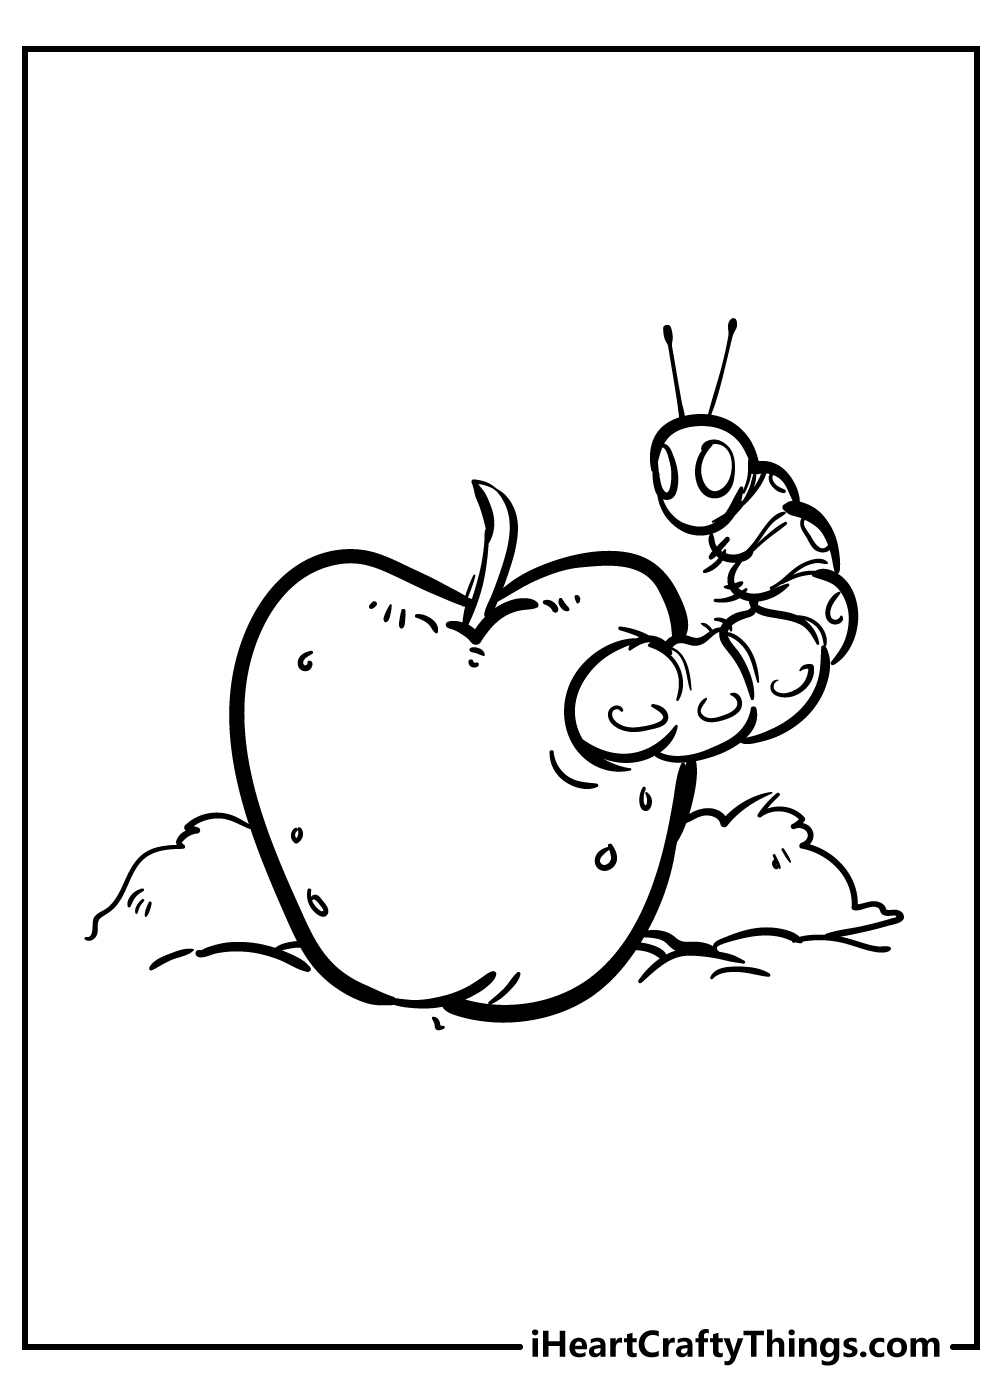 Apple Coloring Pages free printable for kids